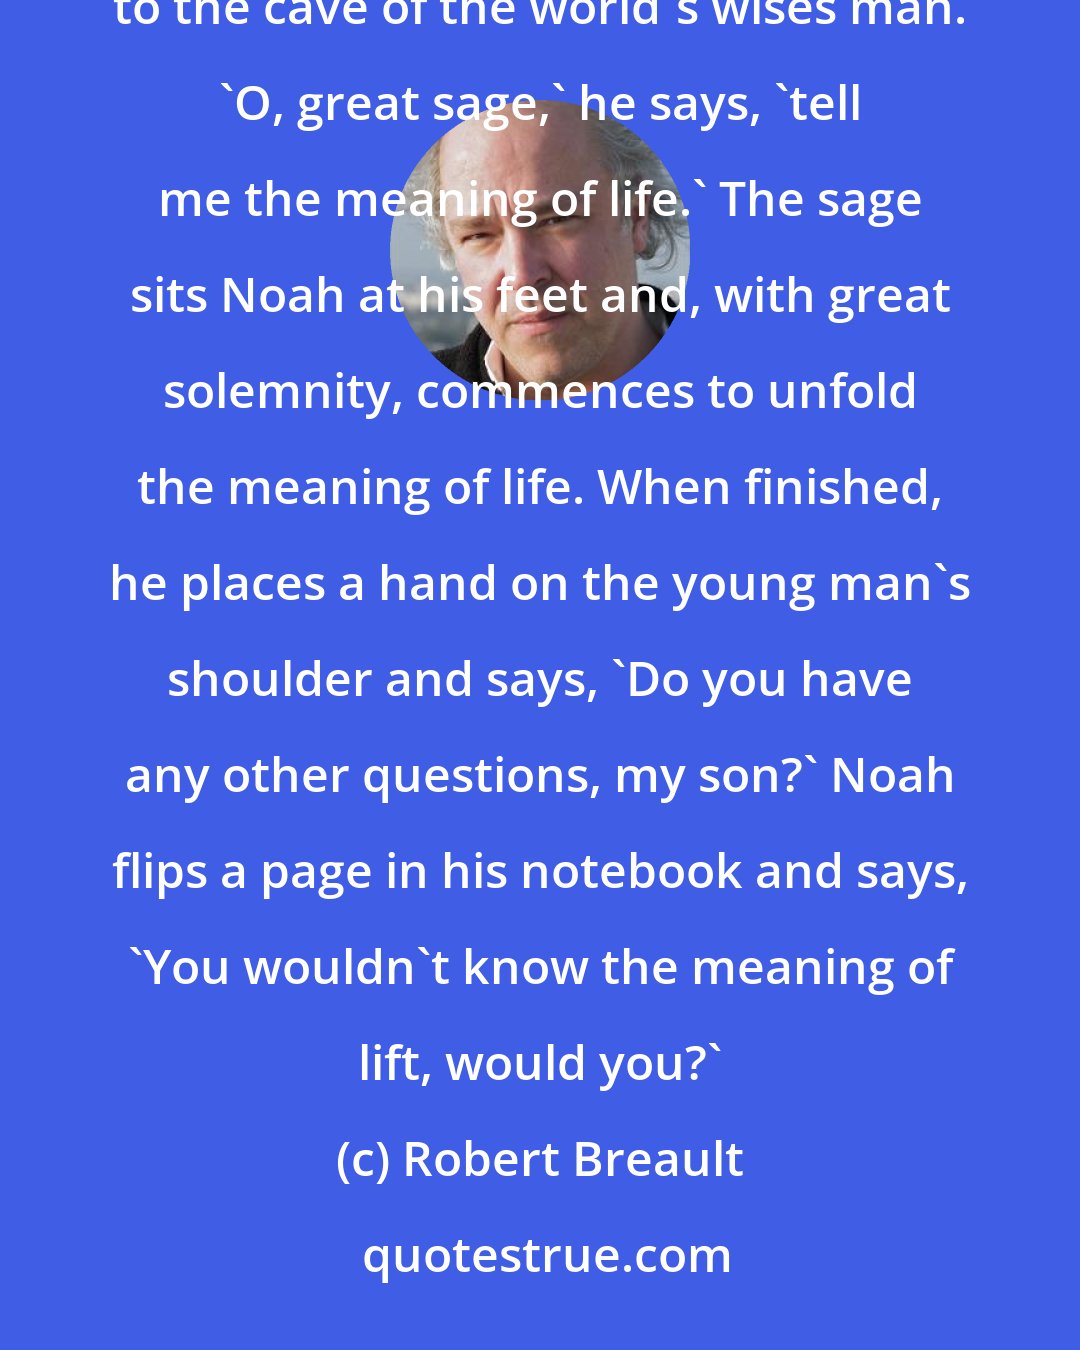 Robert Breault: When compiling his great dictionary, the young Noah Webster travels to the Himalayas, where he climbs to the cave of the world's wises man. 'O, great sage,' he says, 'tell me the meaning of life.' The sage sits Noah at his feet and, with great solemnity, commences to unfold the meaning of life. When finished, he places a hand on the young man's shoulder and says, 'Do you have any other questions, my son?' Noah flips a page in his notebook and says, 'You wouldn't know the meaning of lift, would you?'